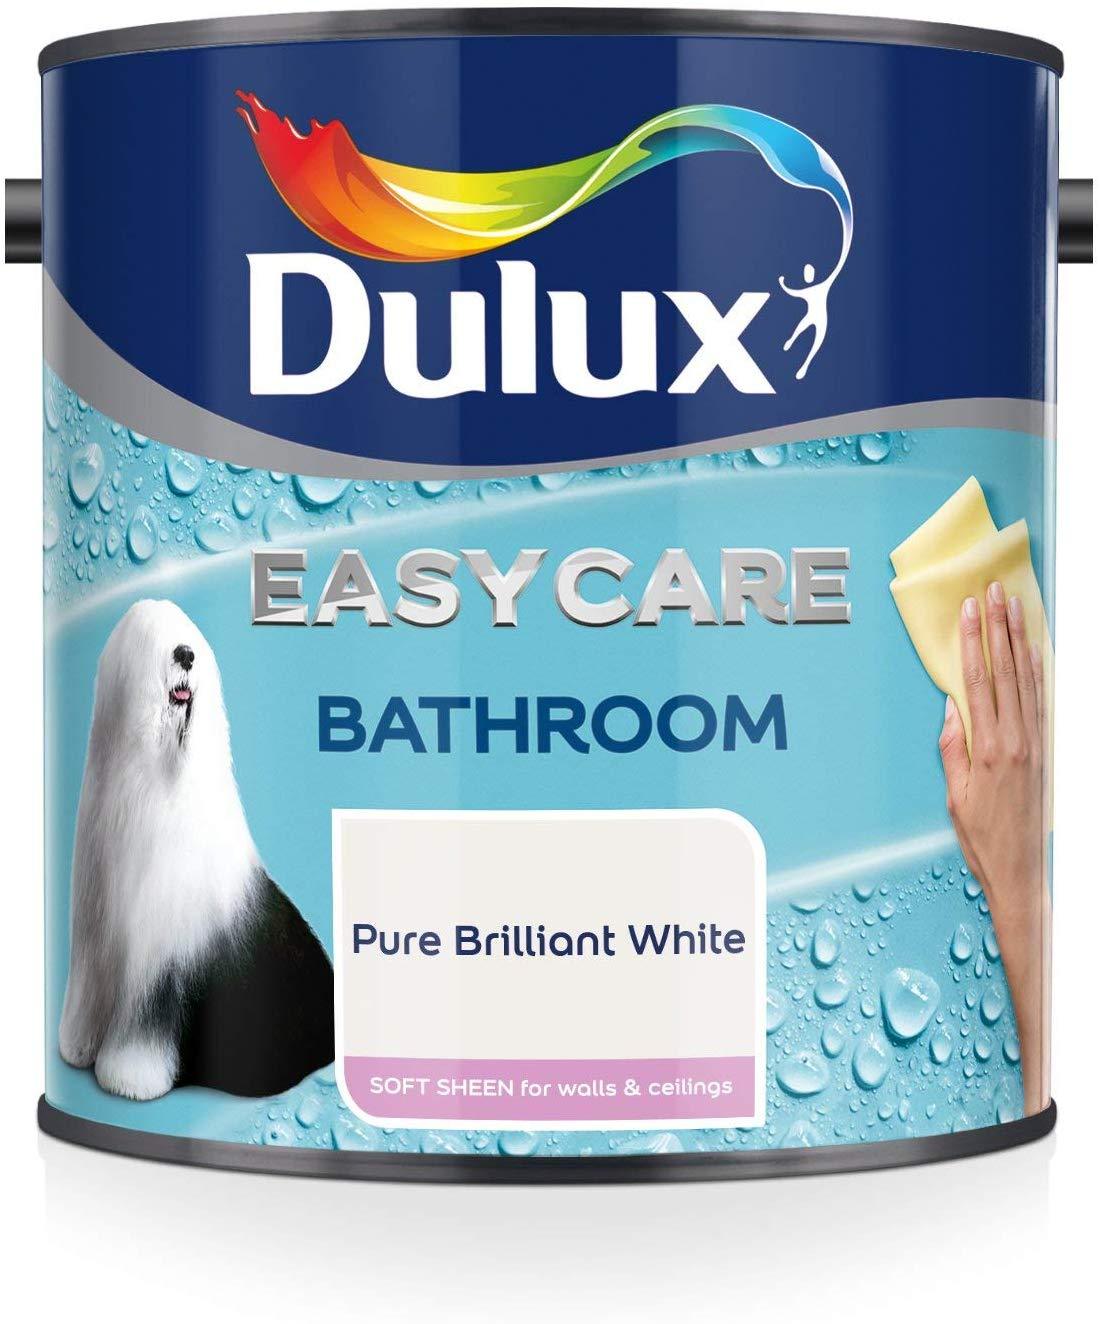 Dulux-Easycare-Bathroom-Soft-Sheen-Emulsion-Paint-For-Walls-And-Ceilings-Pure-Brilliant-White-2.5L